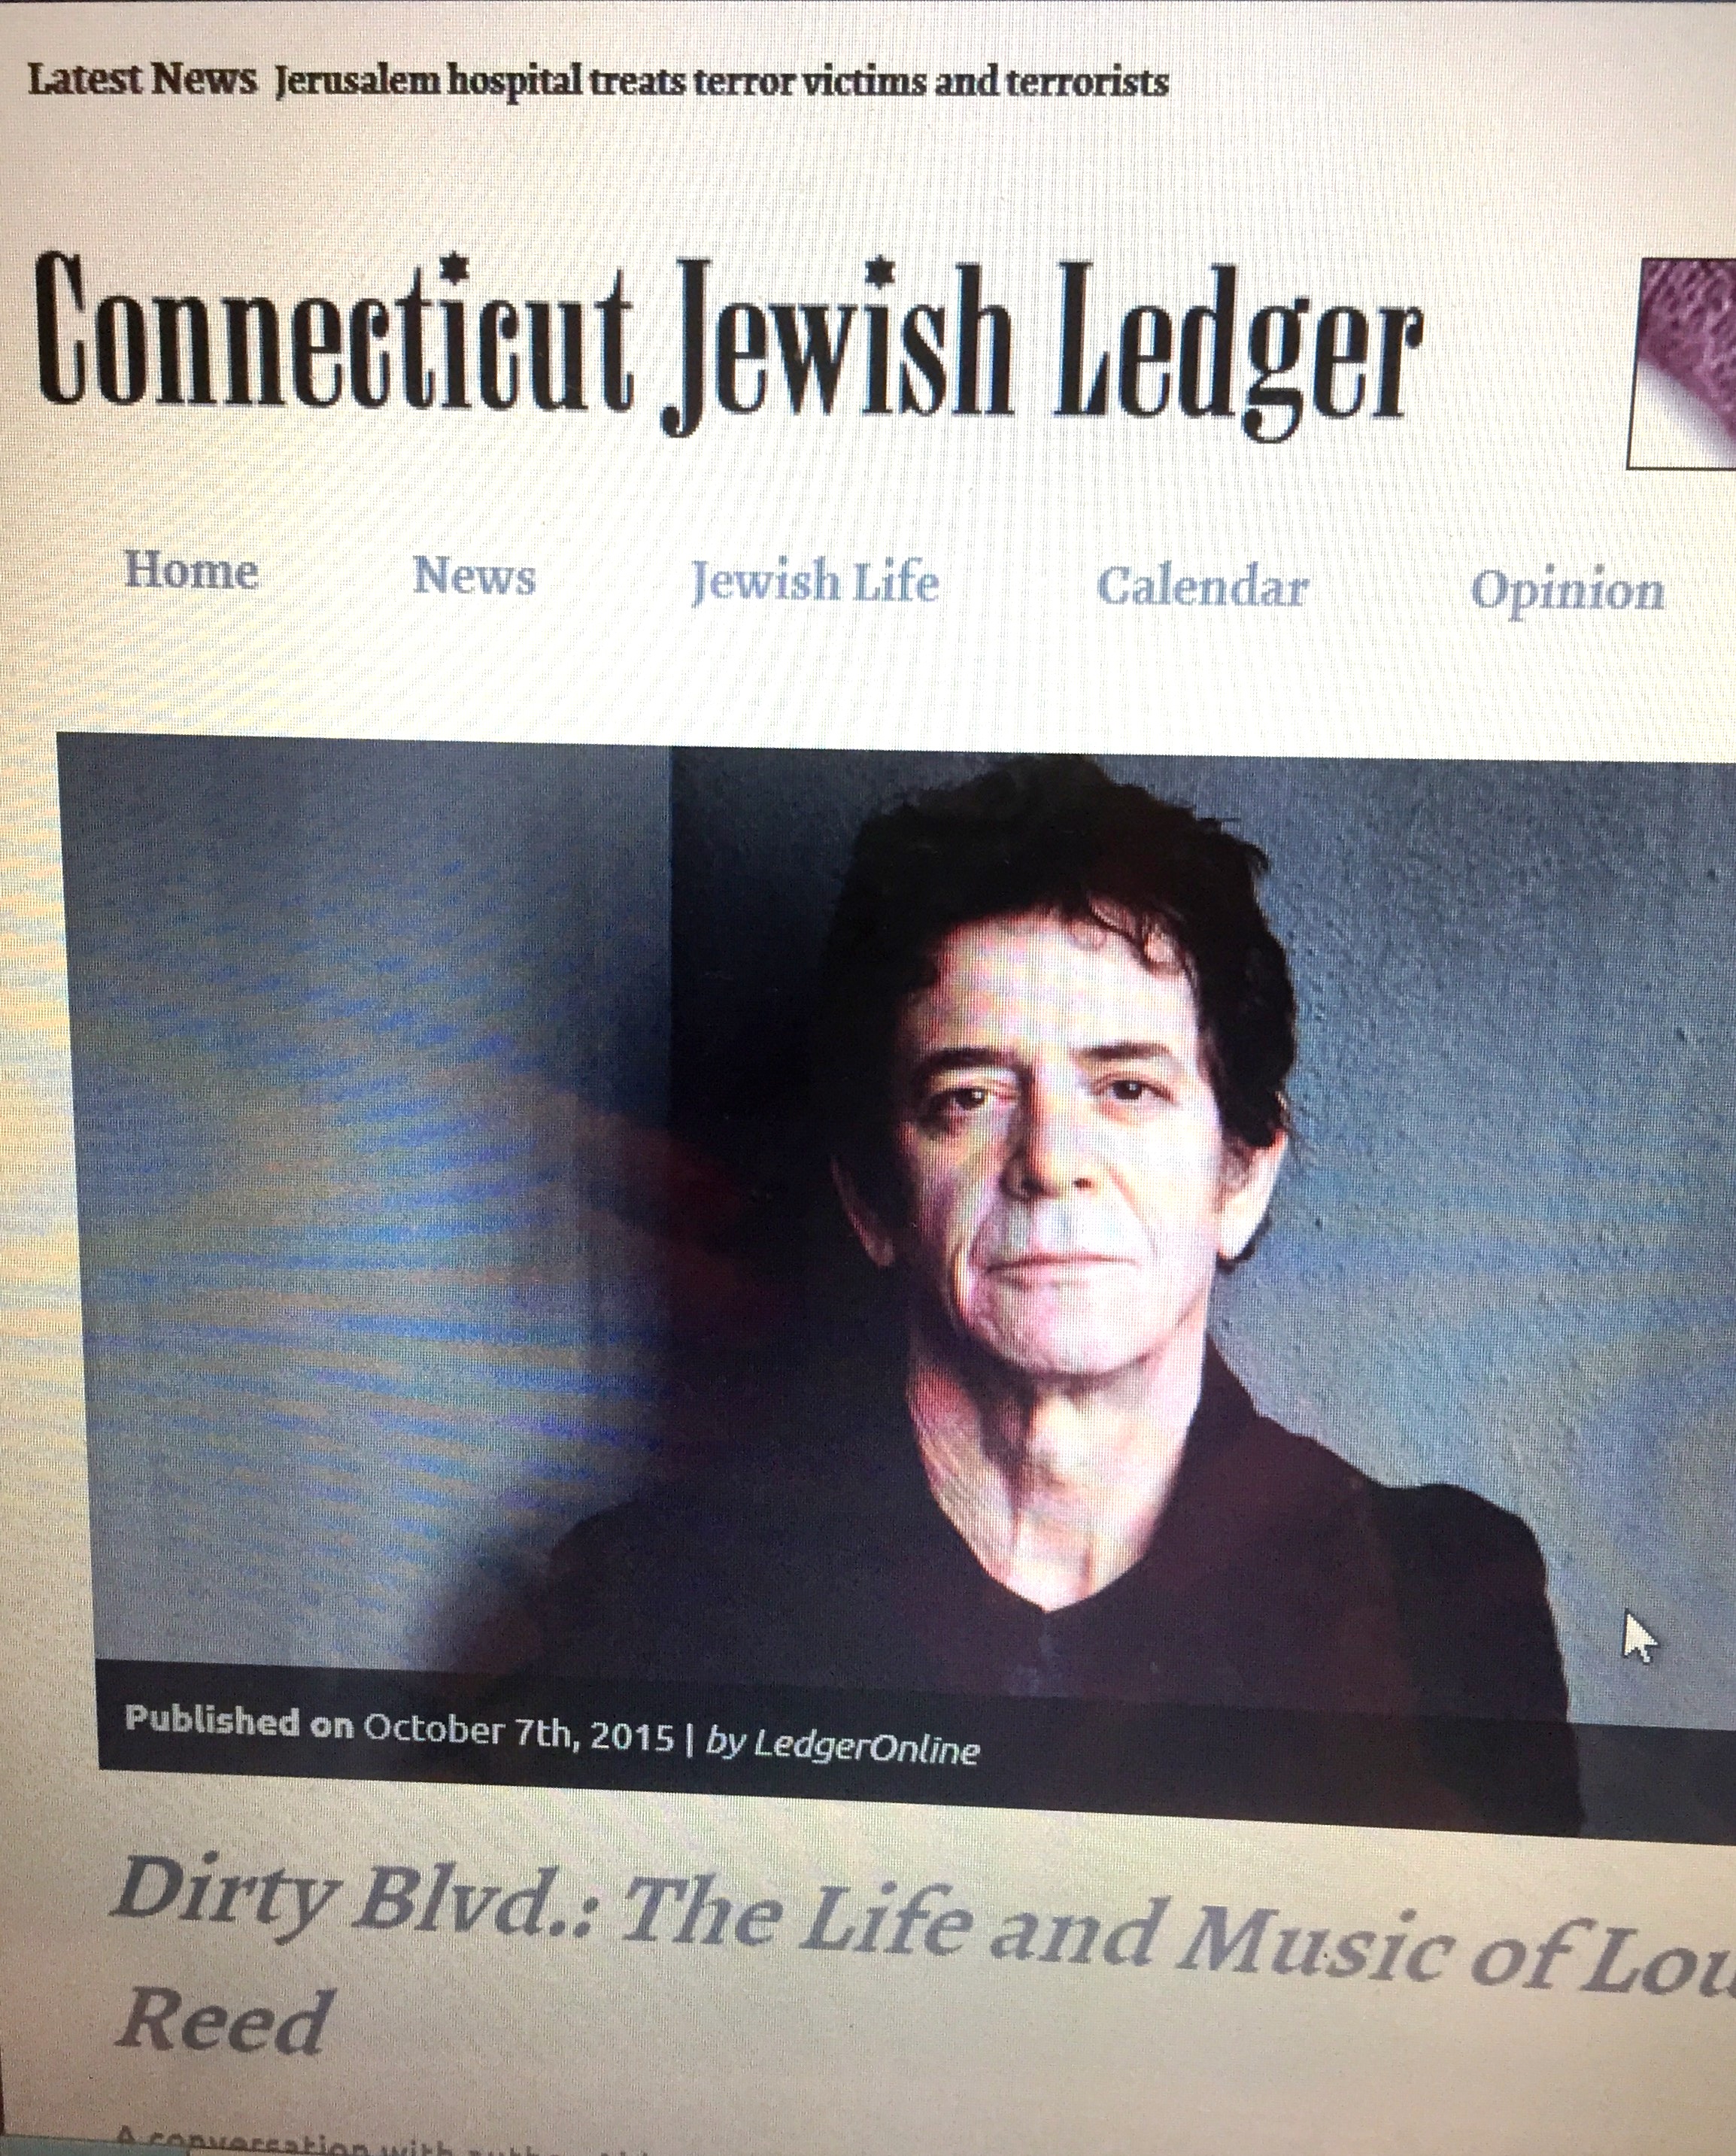 CT Jewish Ledger with Lou Reed book story.jpg